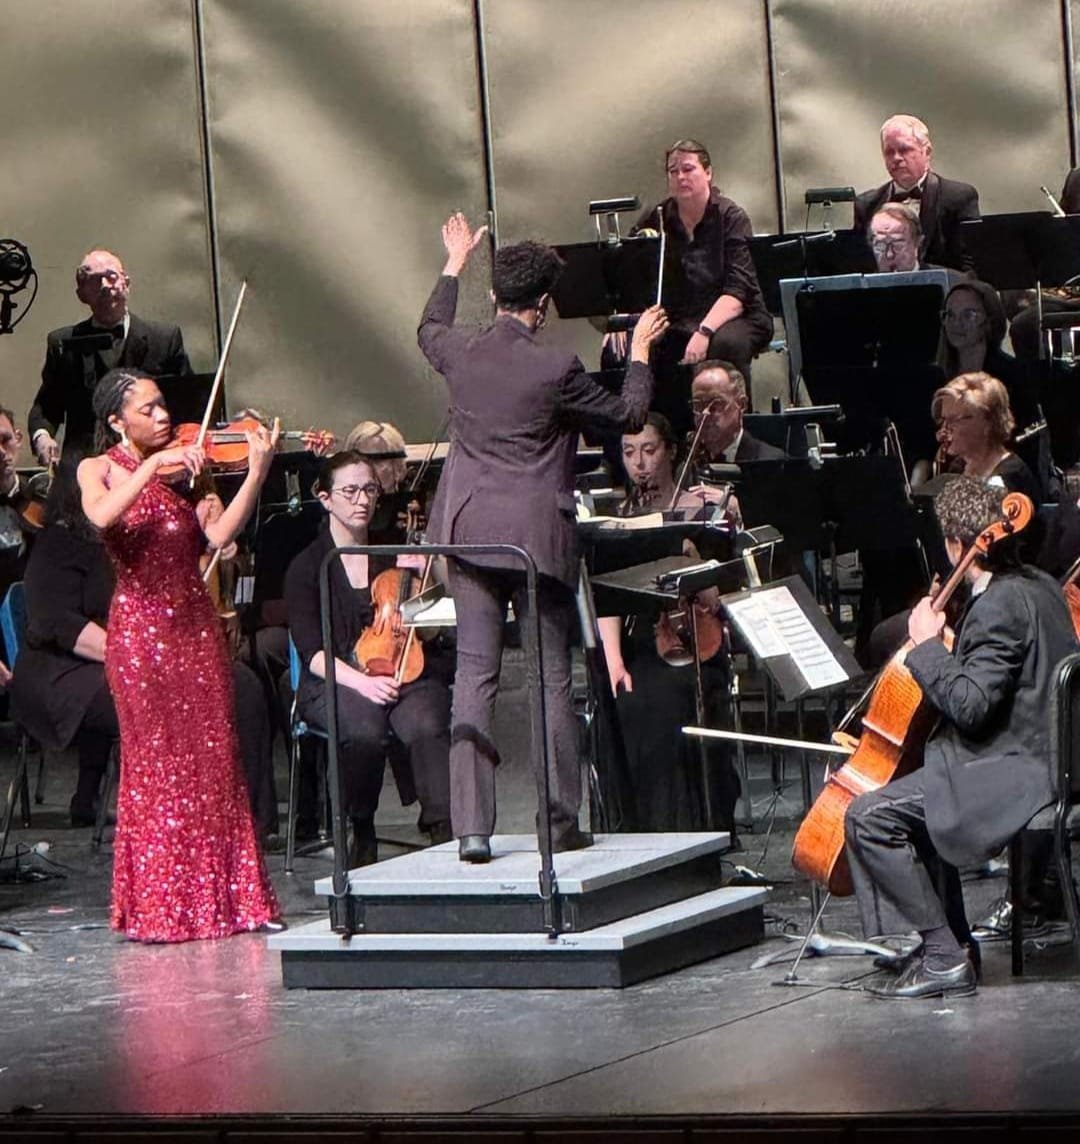 I had a really wonderful time in NC this past week with the Salisbury Symphony. One of the highlights was being able to work with the amazingly talented Njioma Grevious in Dvorak's violin concerto.